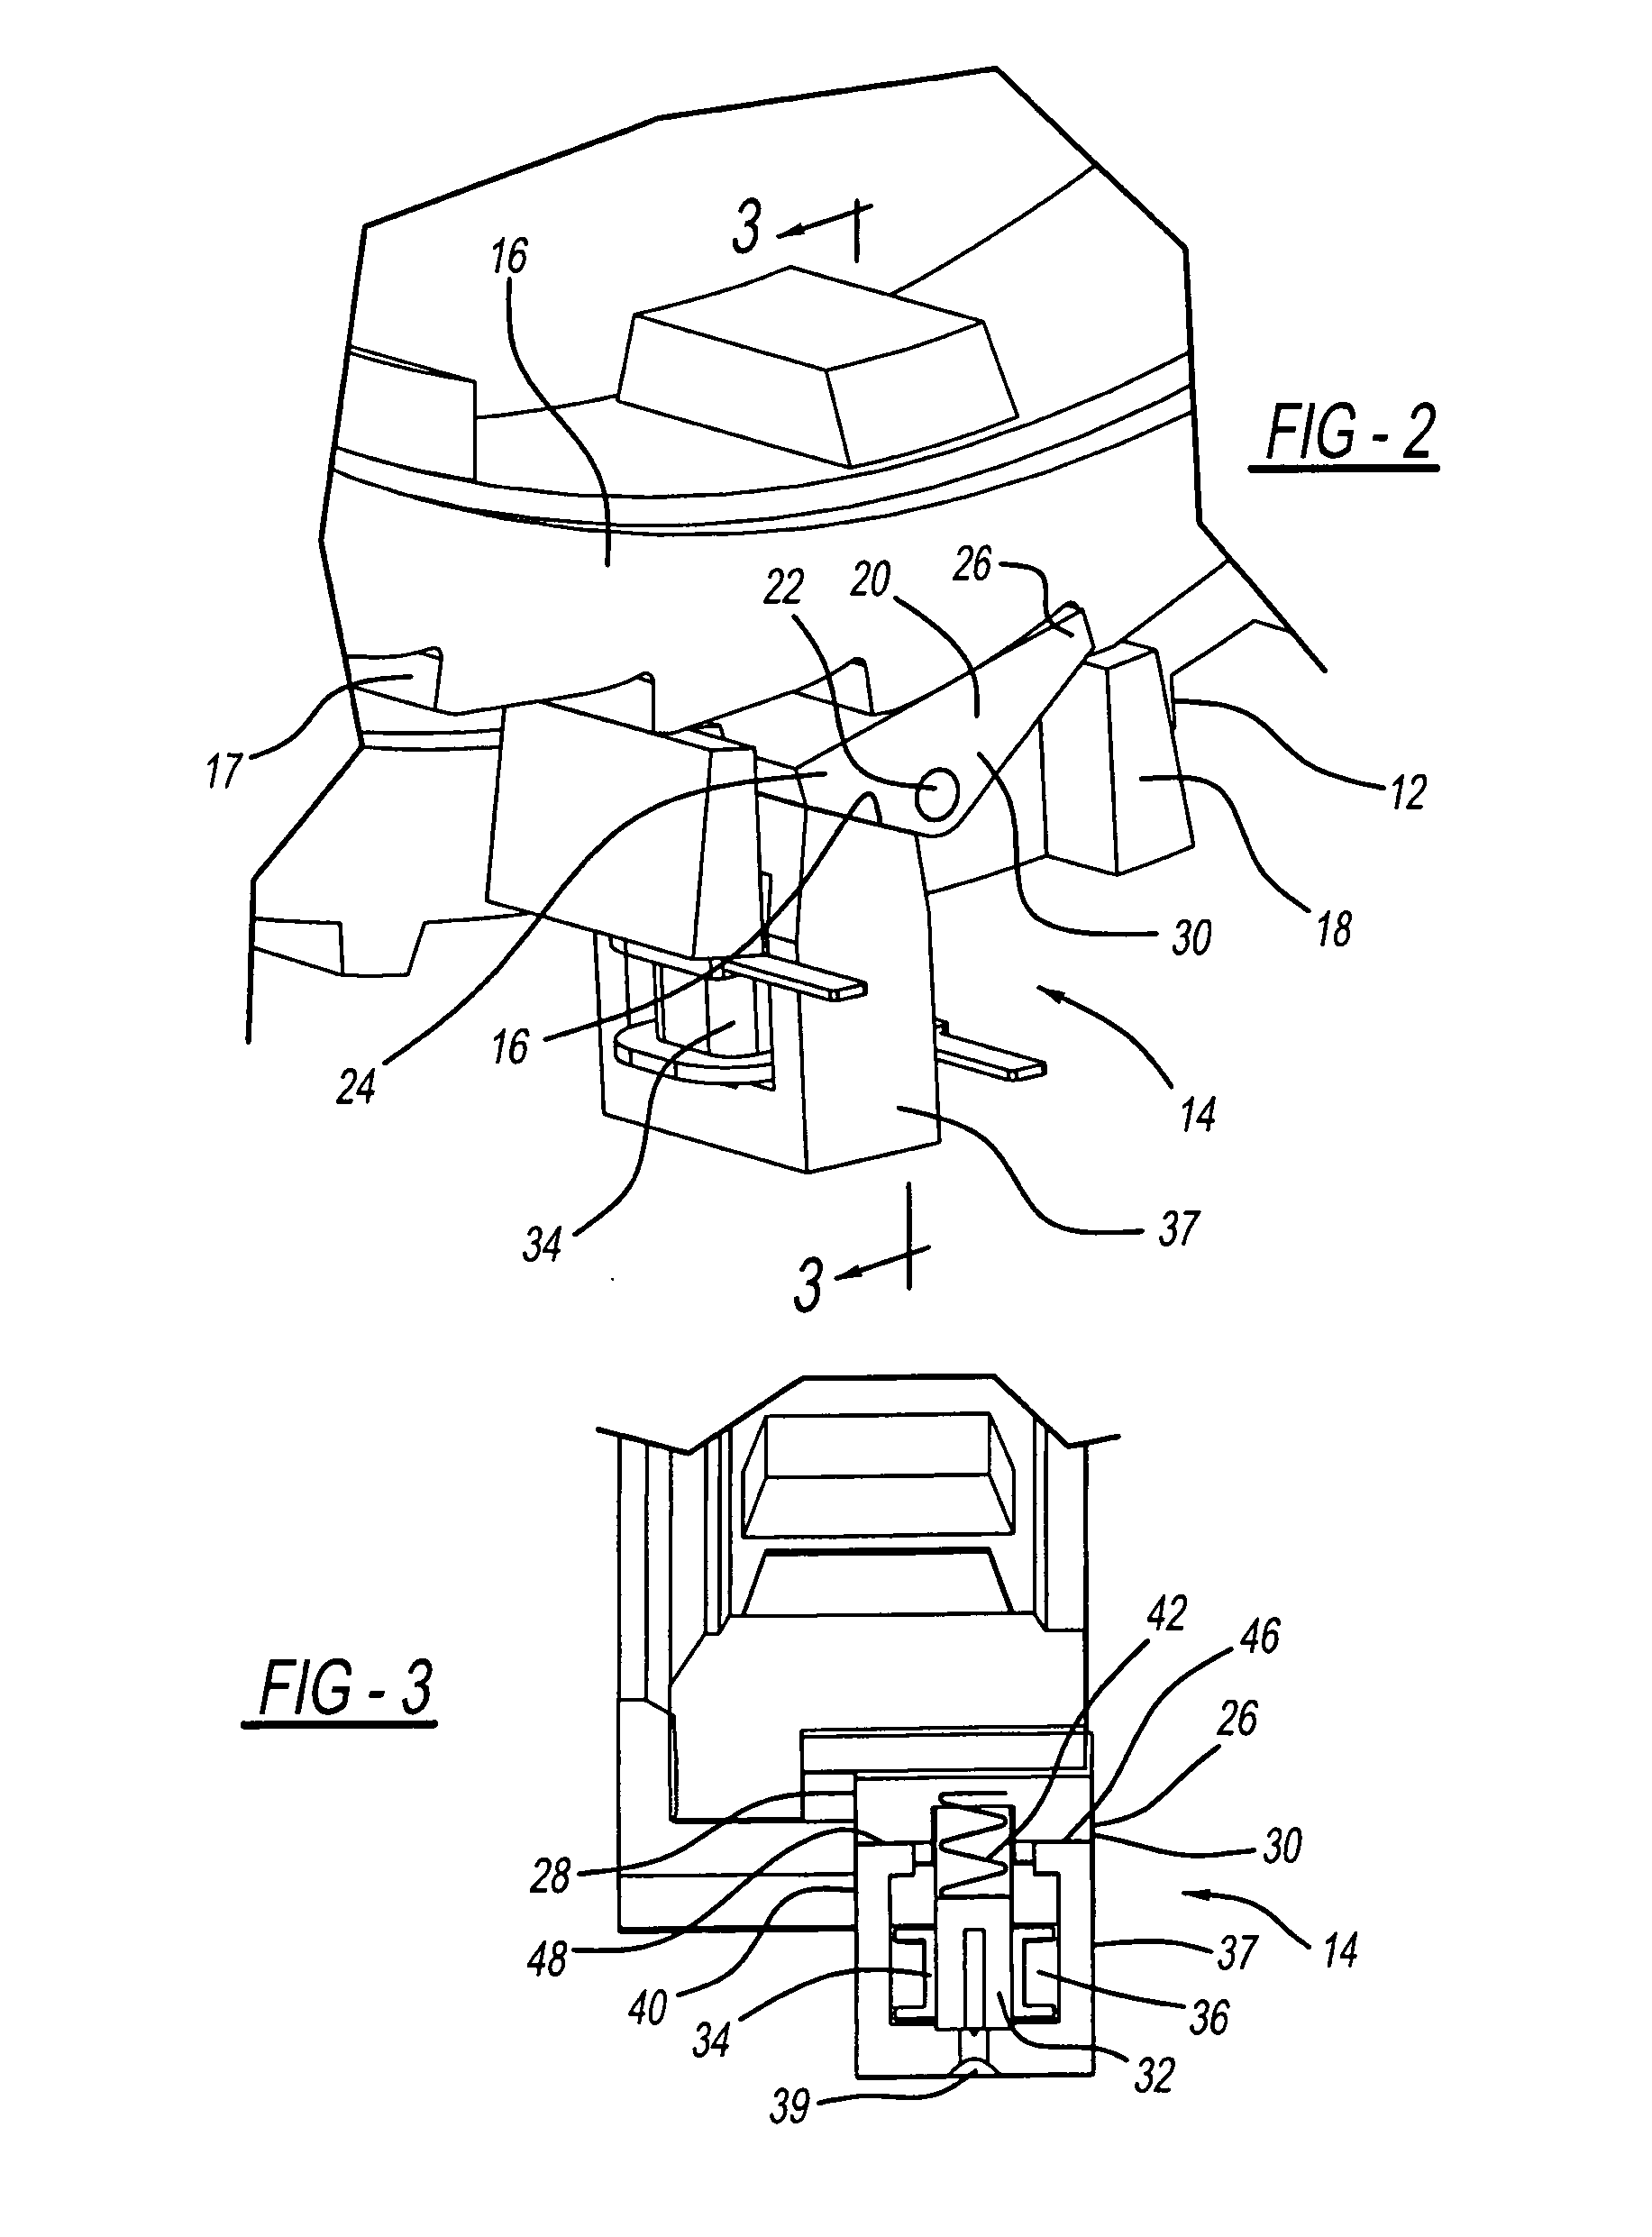 Electric actuator module for selectable clutch